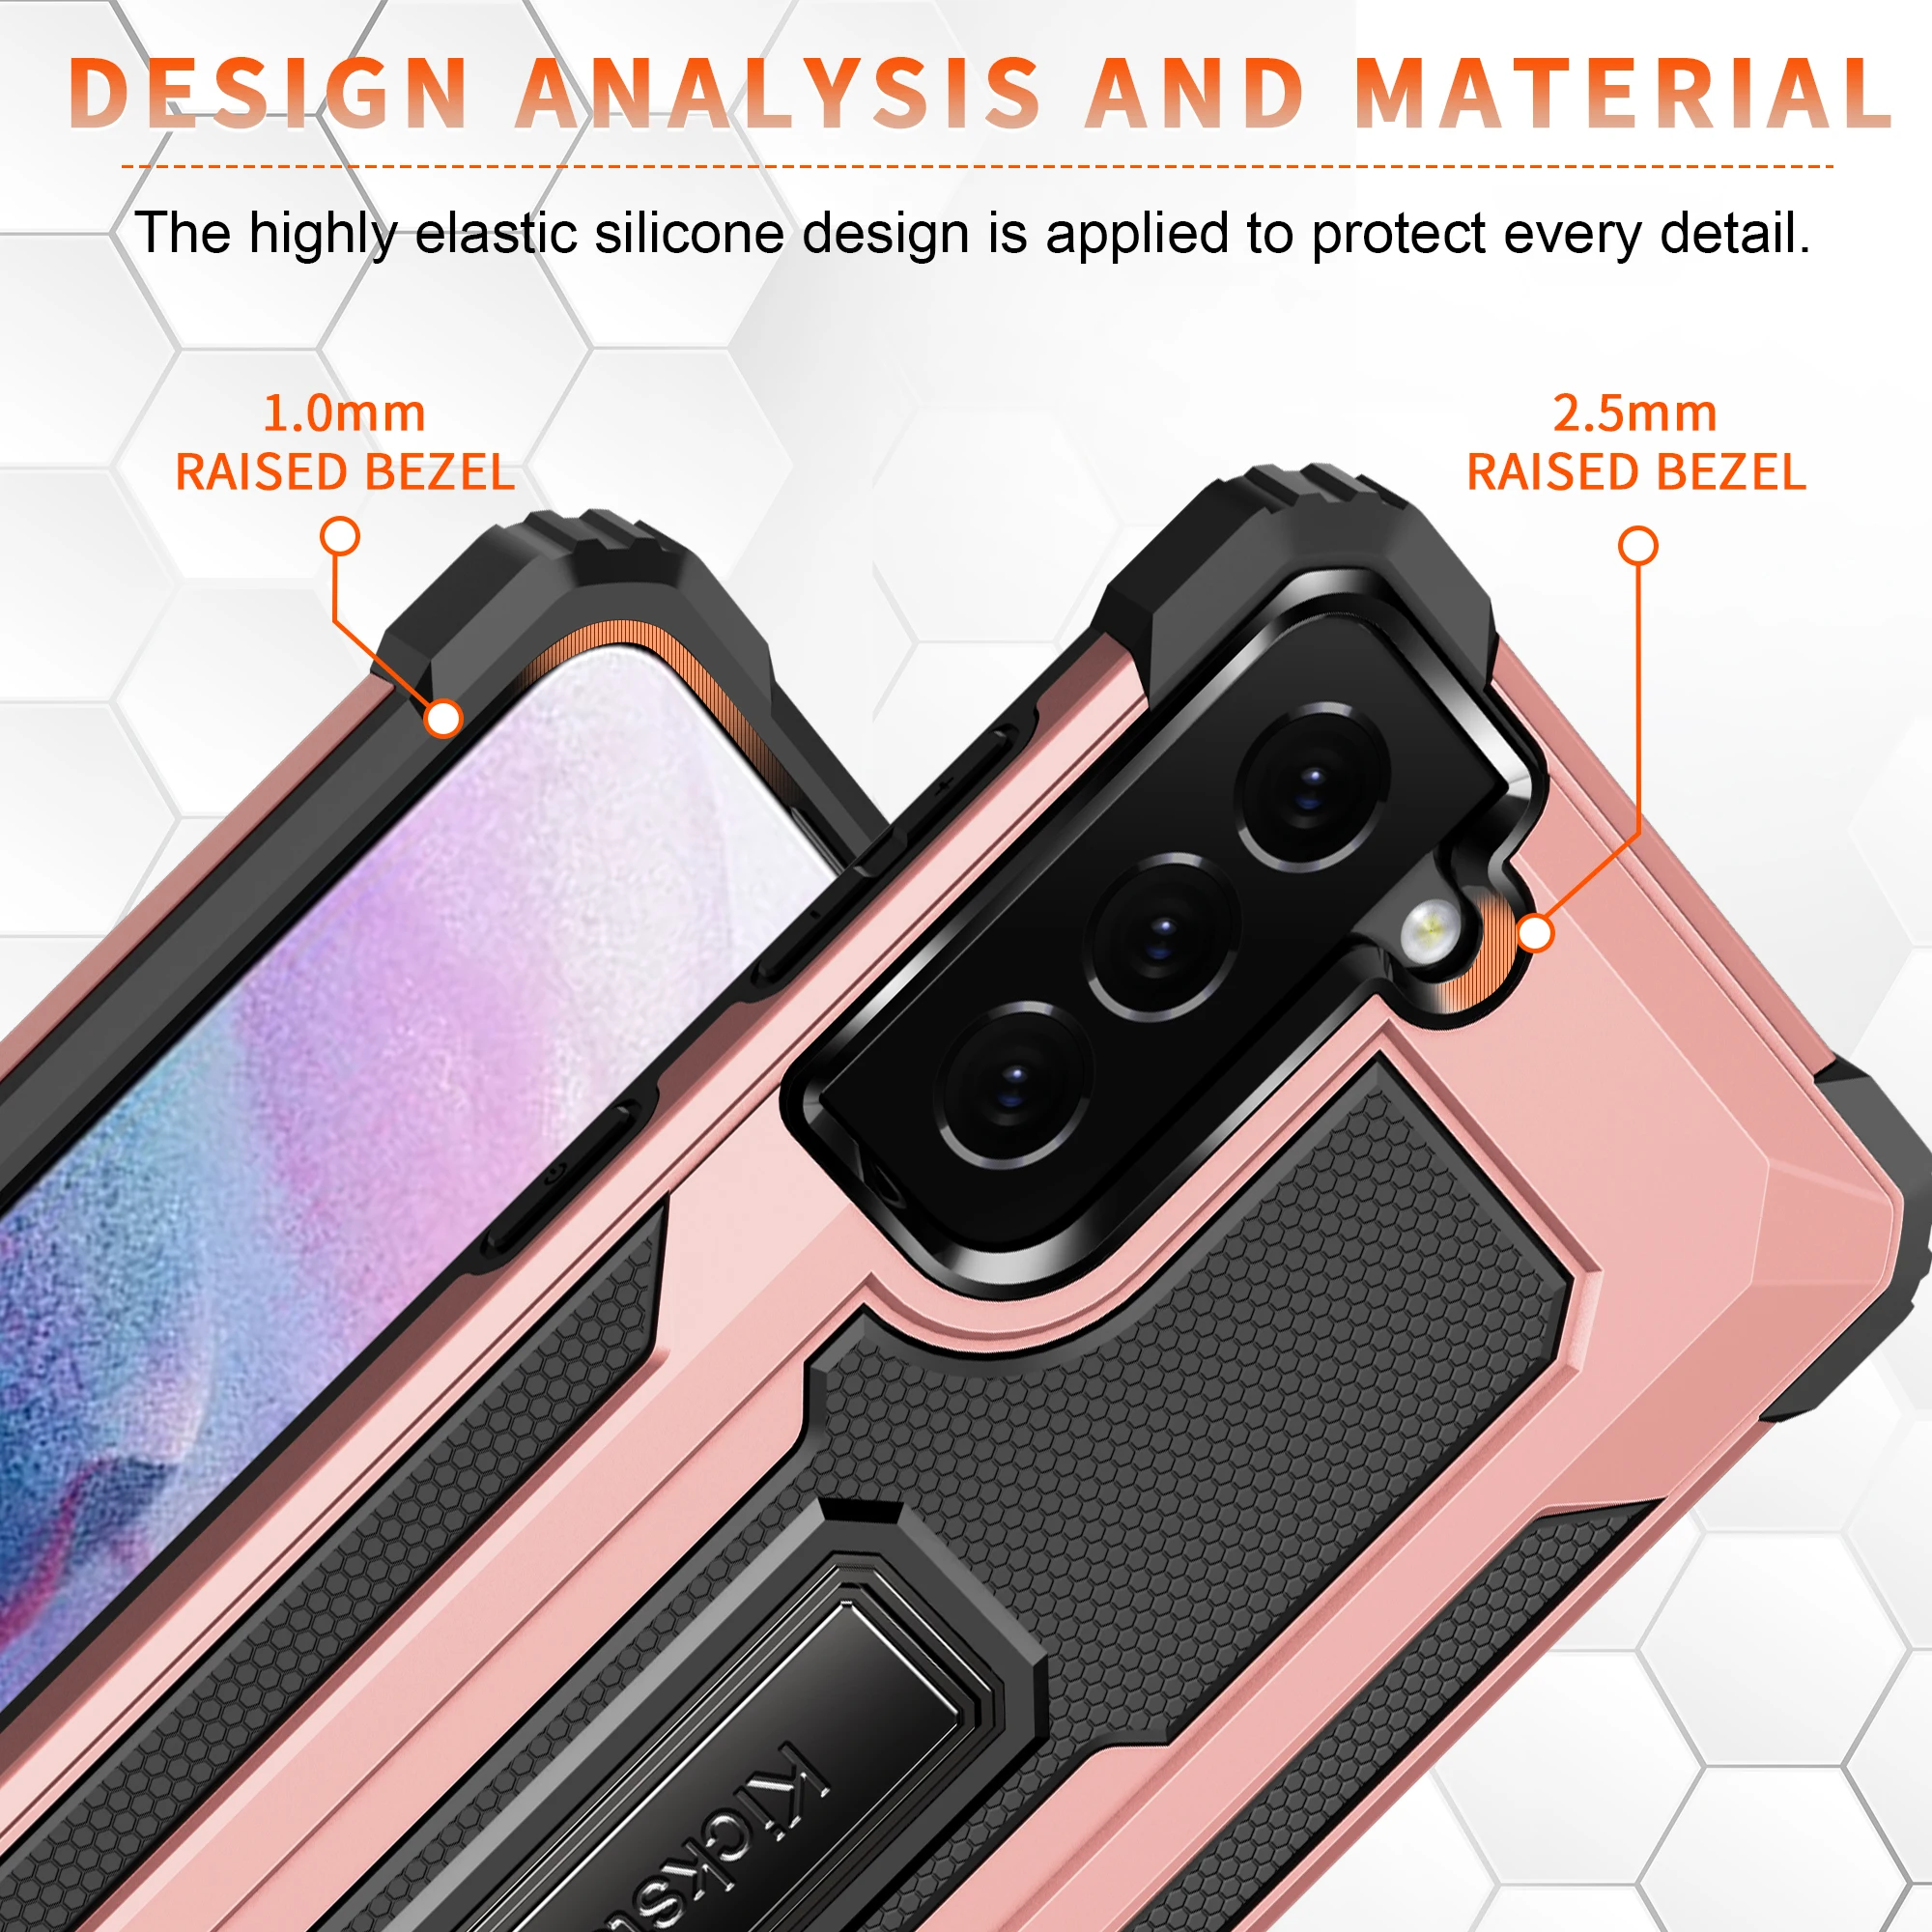 

Rugged Armor Phone Case For Samsung Galaxy A91 A71 A51 A31 A21S A21 A11 4G 5G Four Corners Shockproof Metal Stand Protector Case